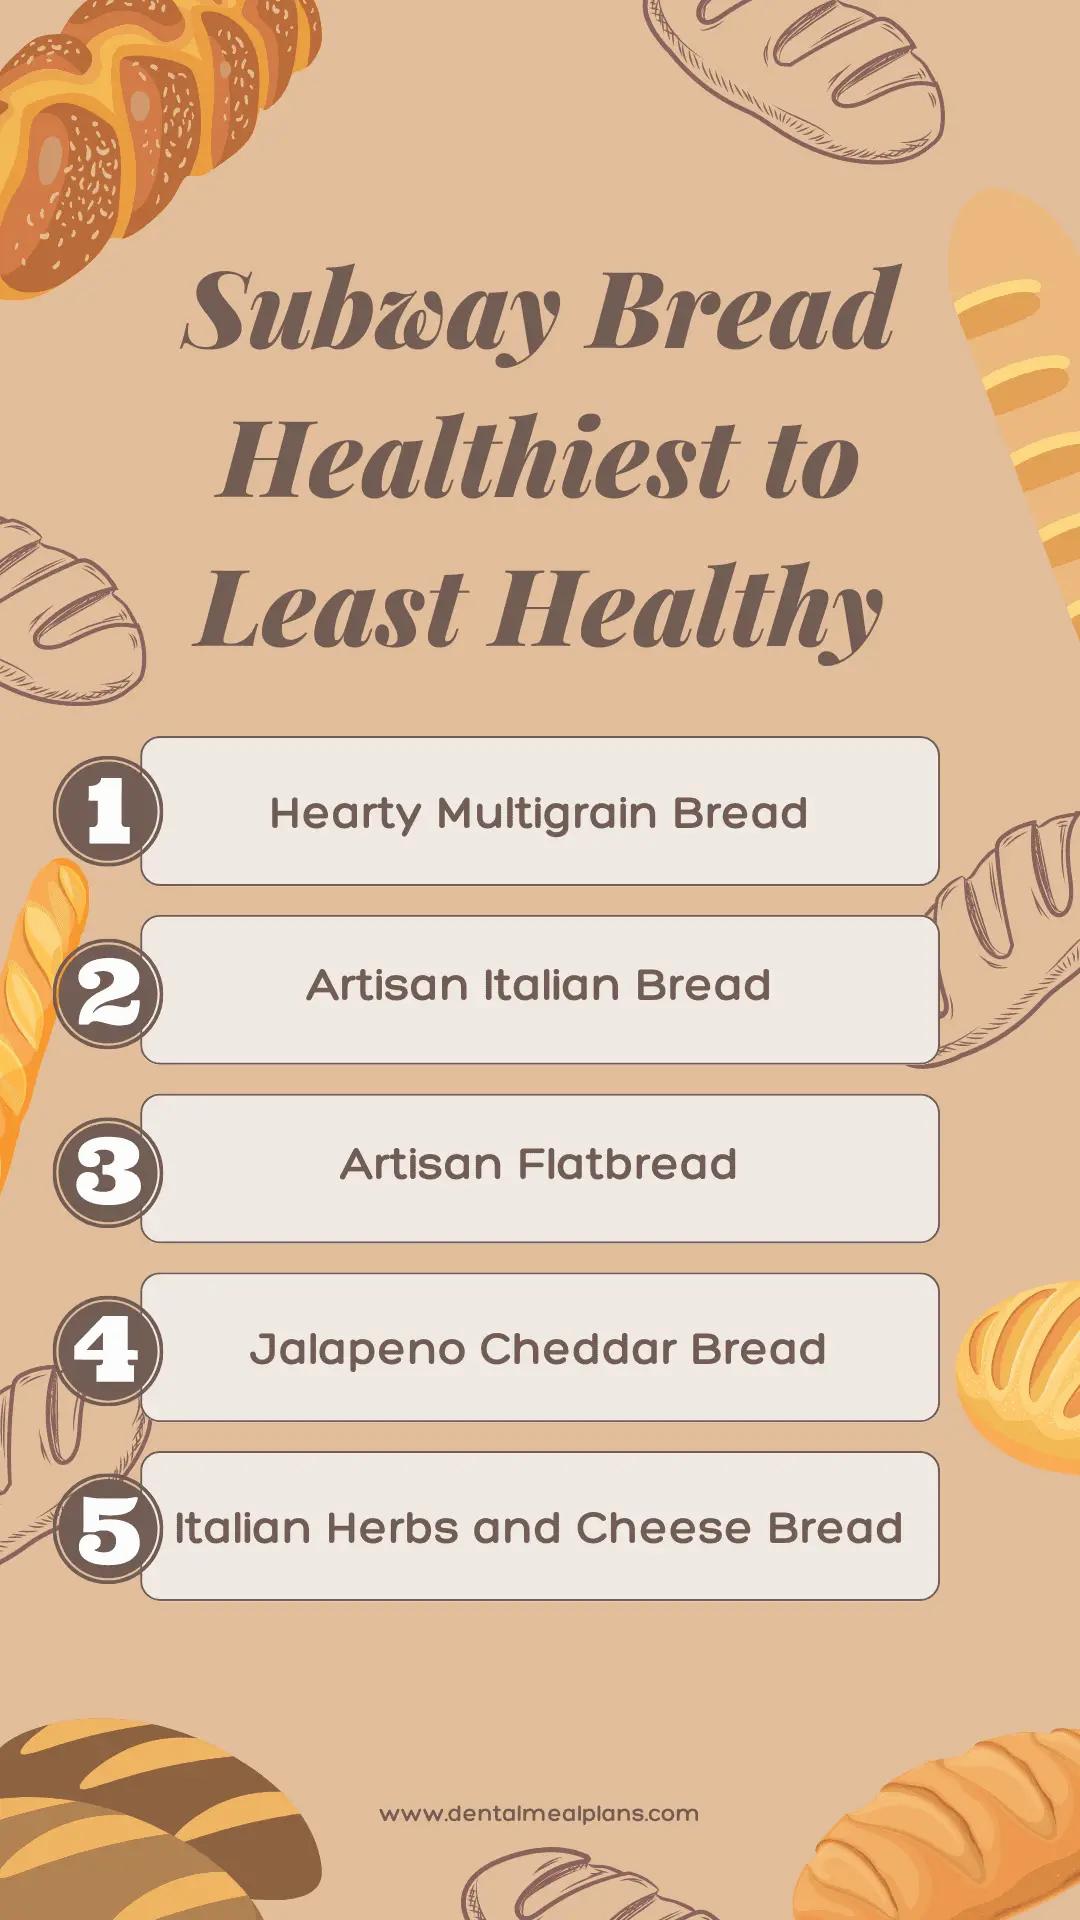 A tier list ranking Subway breads from healthiest to least healthy.